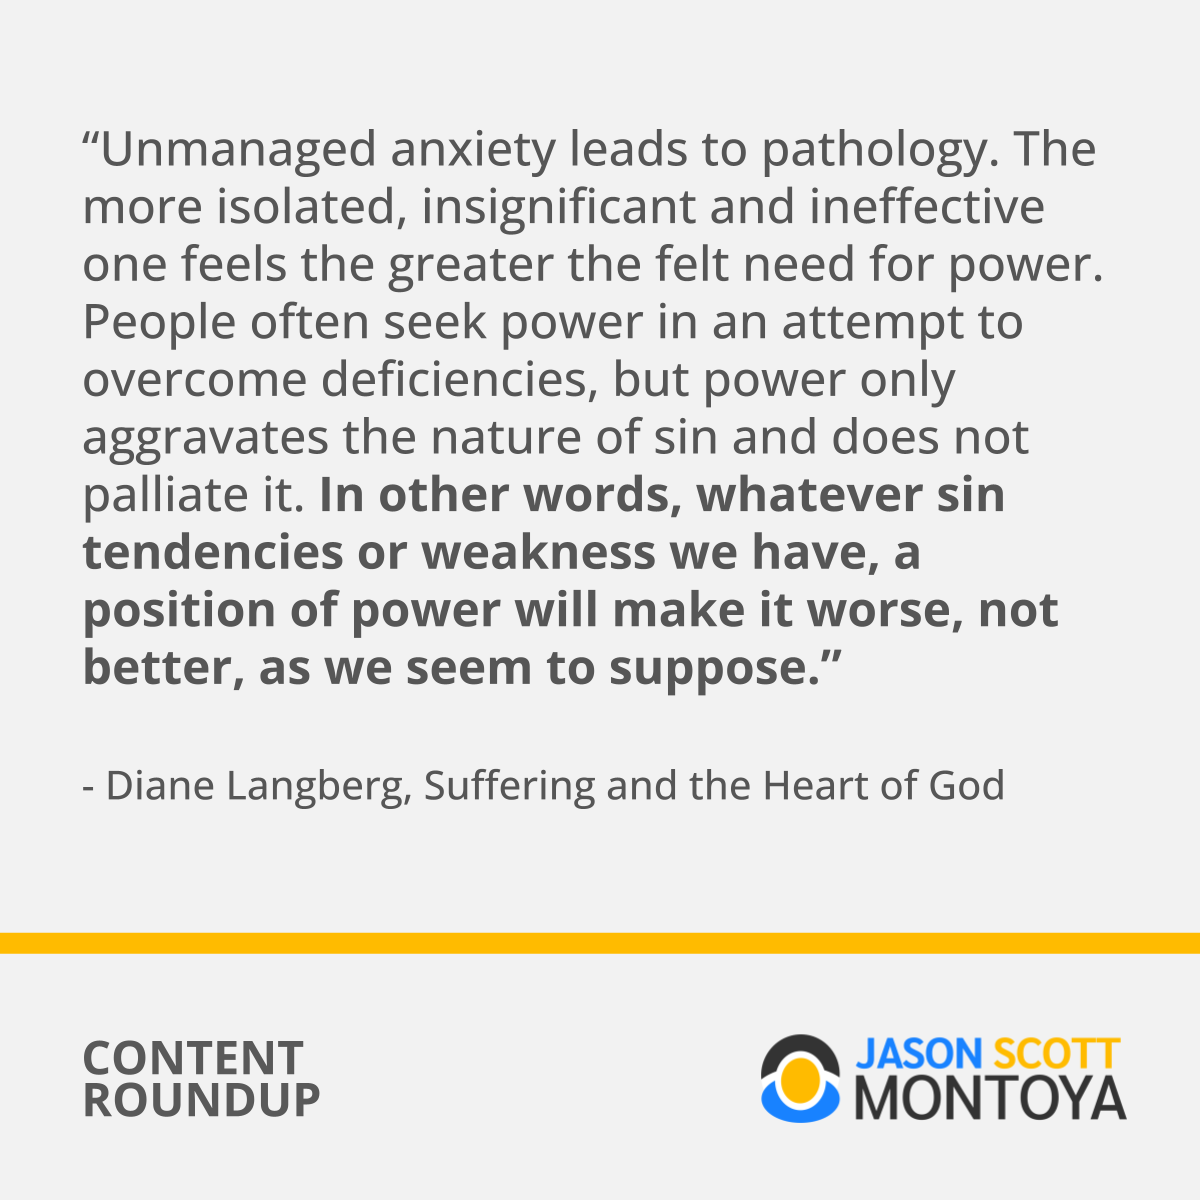 “Unmanaged anxiety leads to pathology. The more isolated, insignificant and ineffective one feels the greater the felt need for power. People often seek power in an attempt to overcome deficiencies, but power only aggravates the nature of sin and does not palliate it. In other words, whatever sin tendencies or weakness we have, a position of power will make it worse, not better, as we seem to suppose.” - Diane Langberg